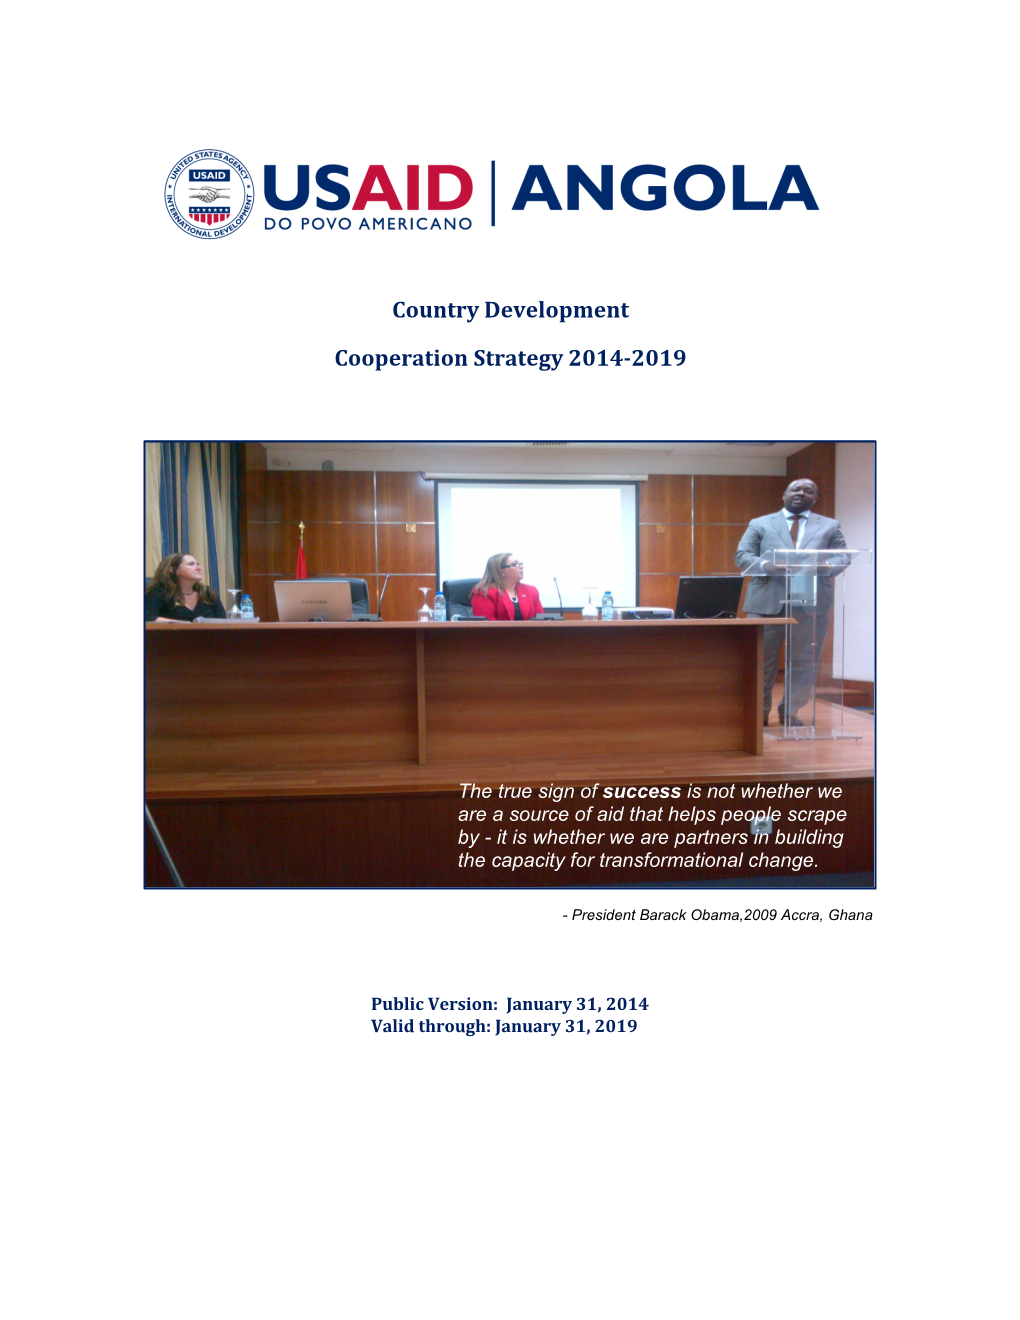 USAID/Angola Country Development Cooperation Strategy: 2014-2019